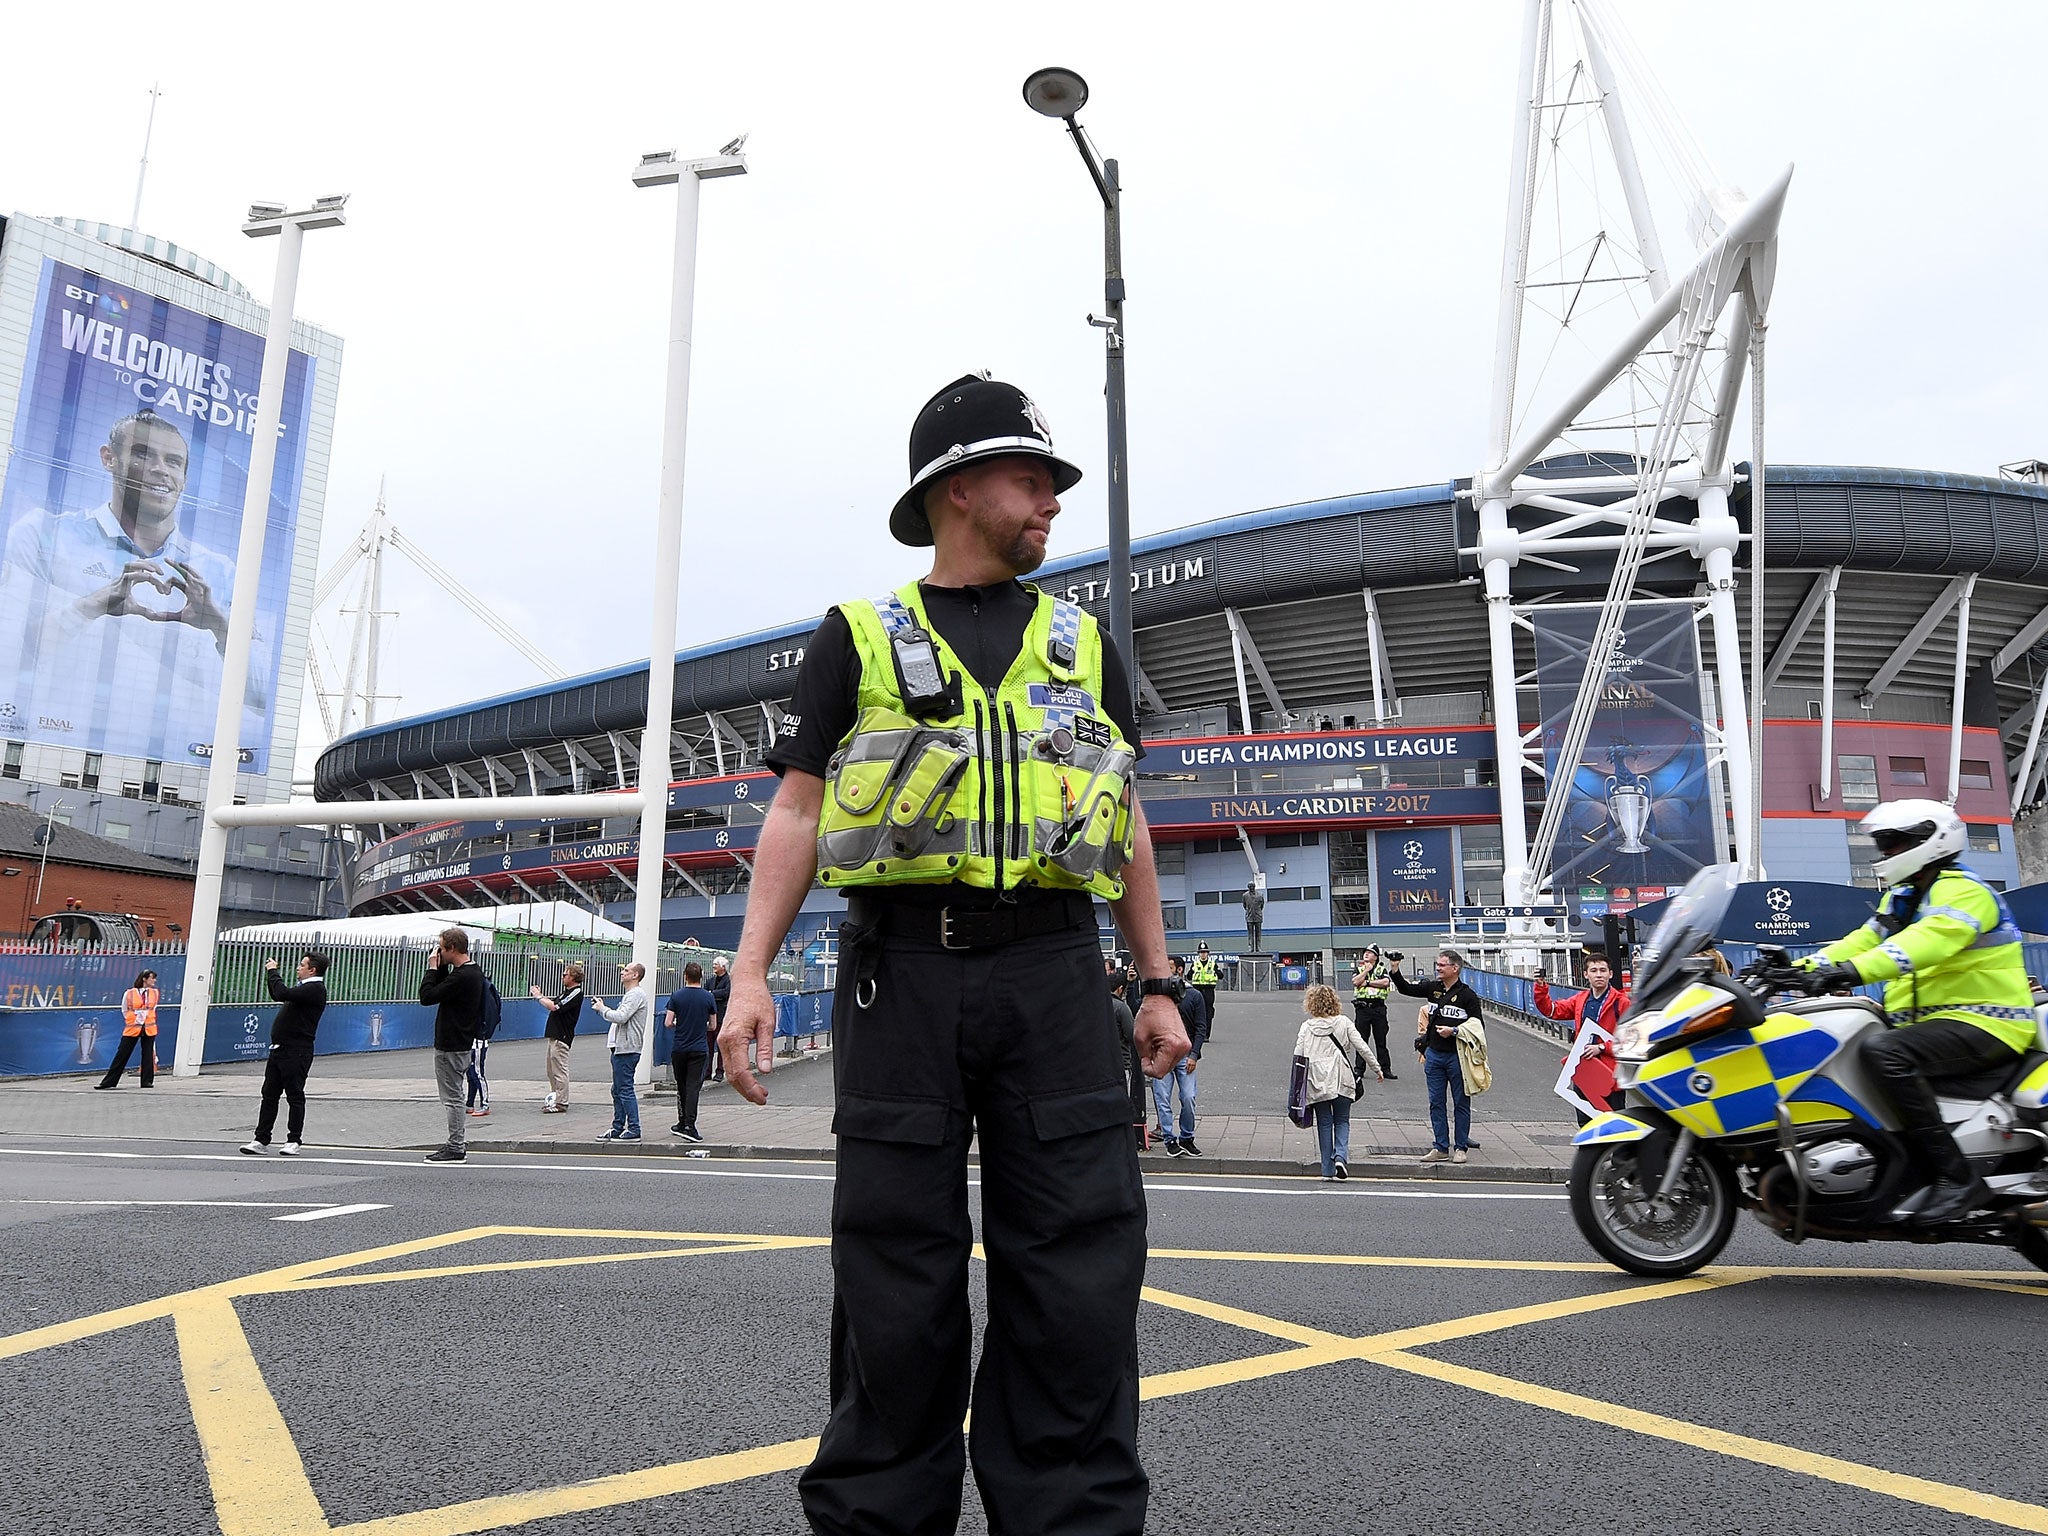 Police are seen near the stadium prior to the UEFA Champions League Final between Juventus and Real Madrid at the National Stadium of Wales on June 2, 2017 in Cardiff, Wales